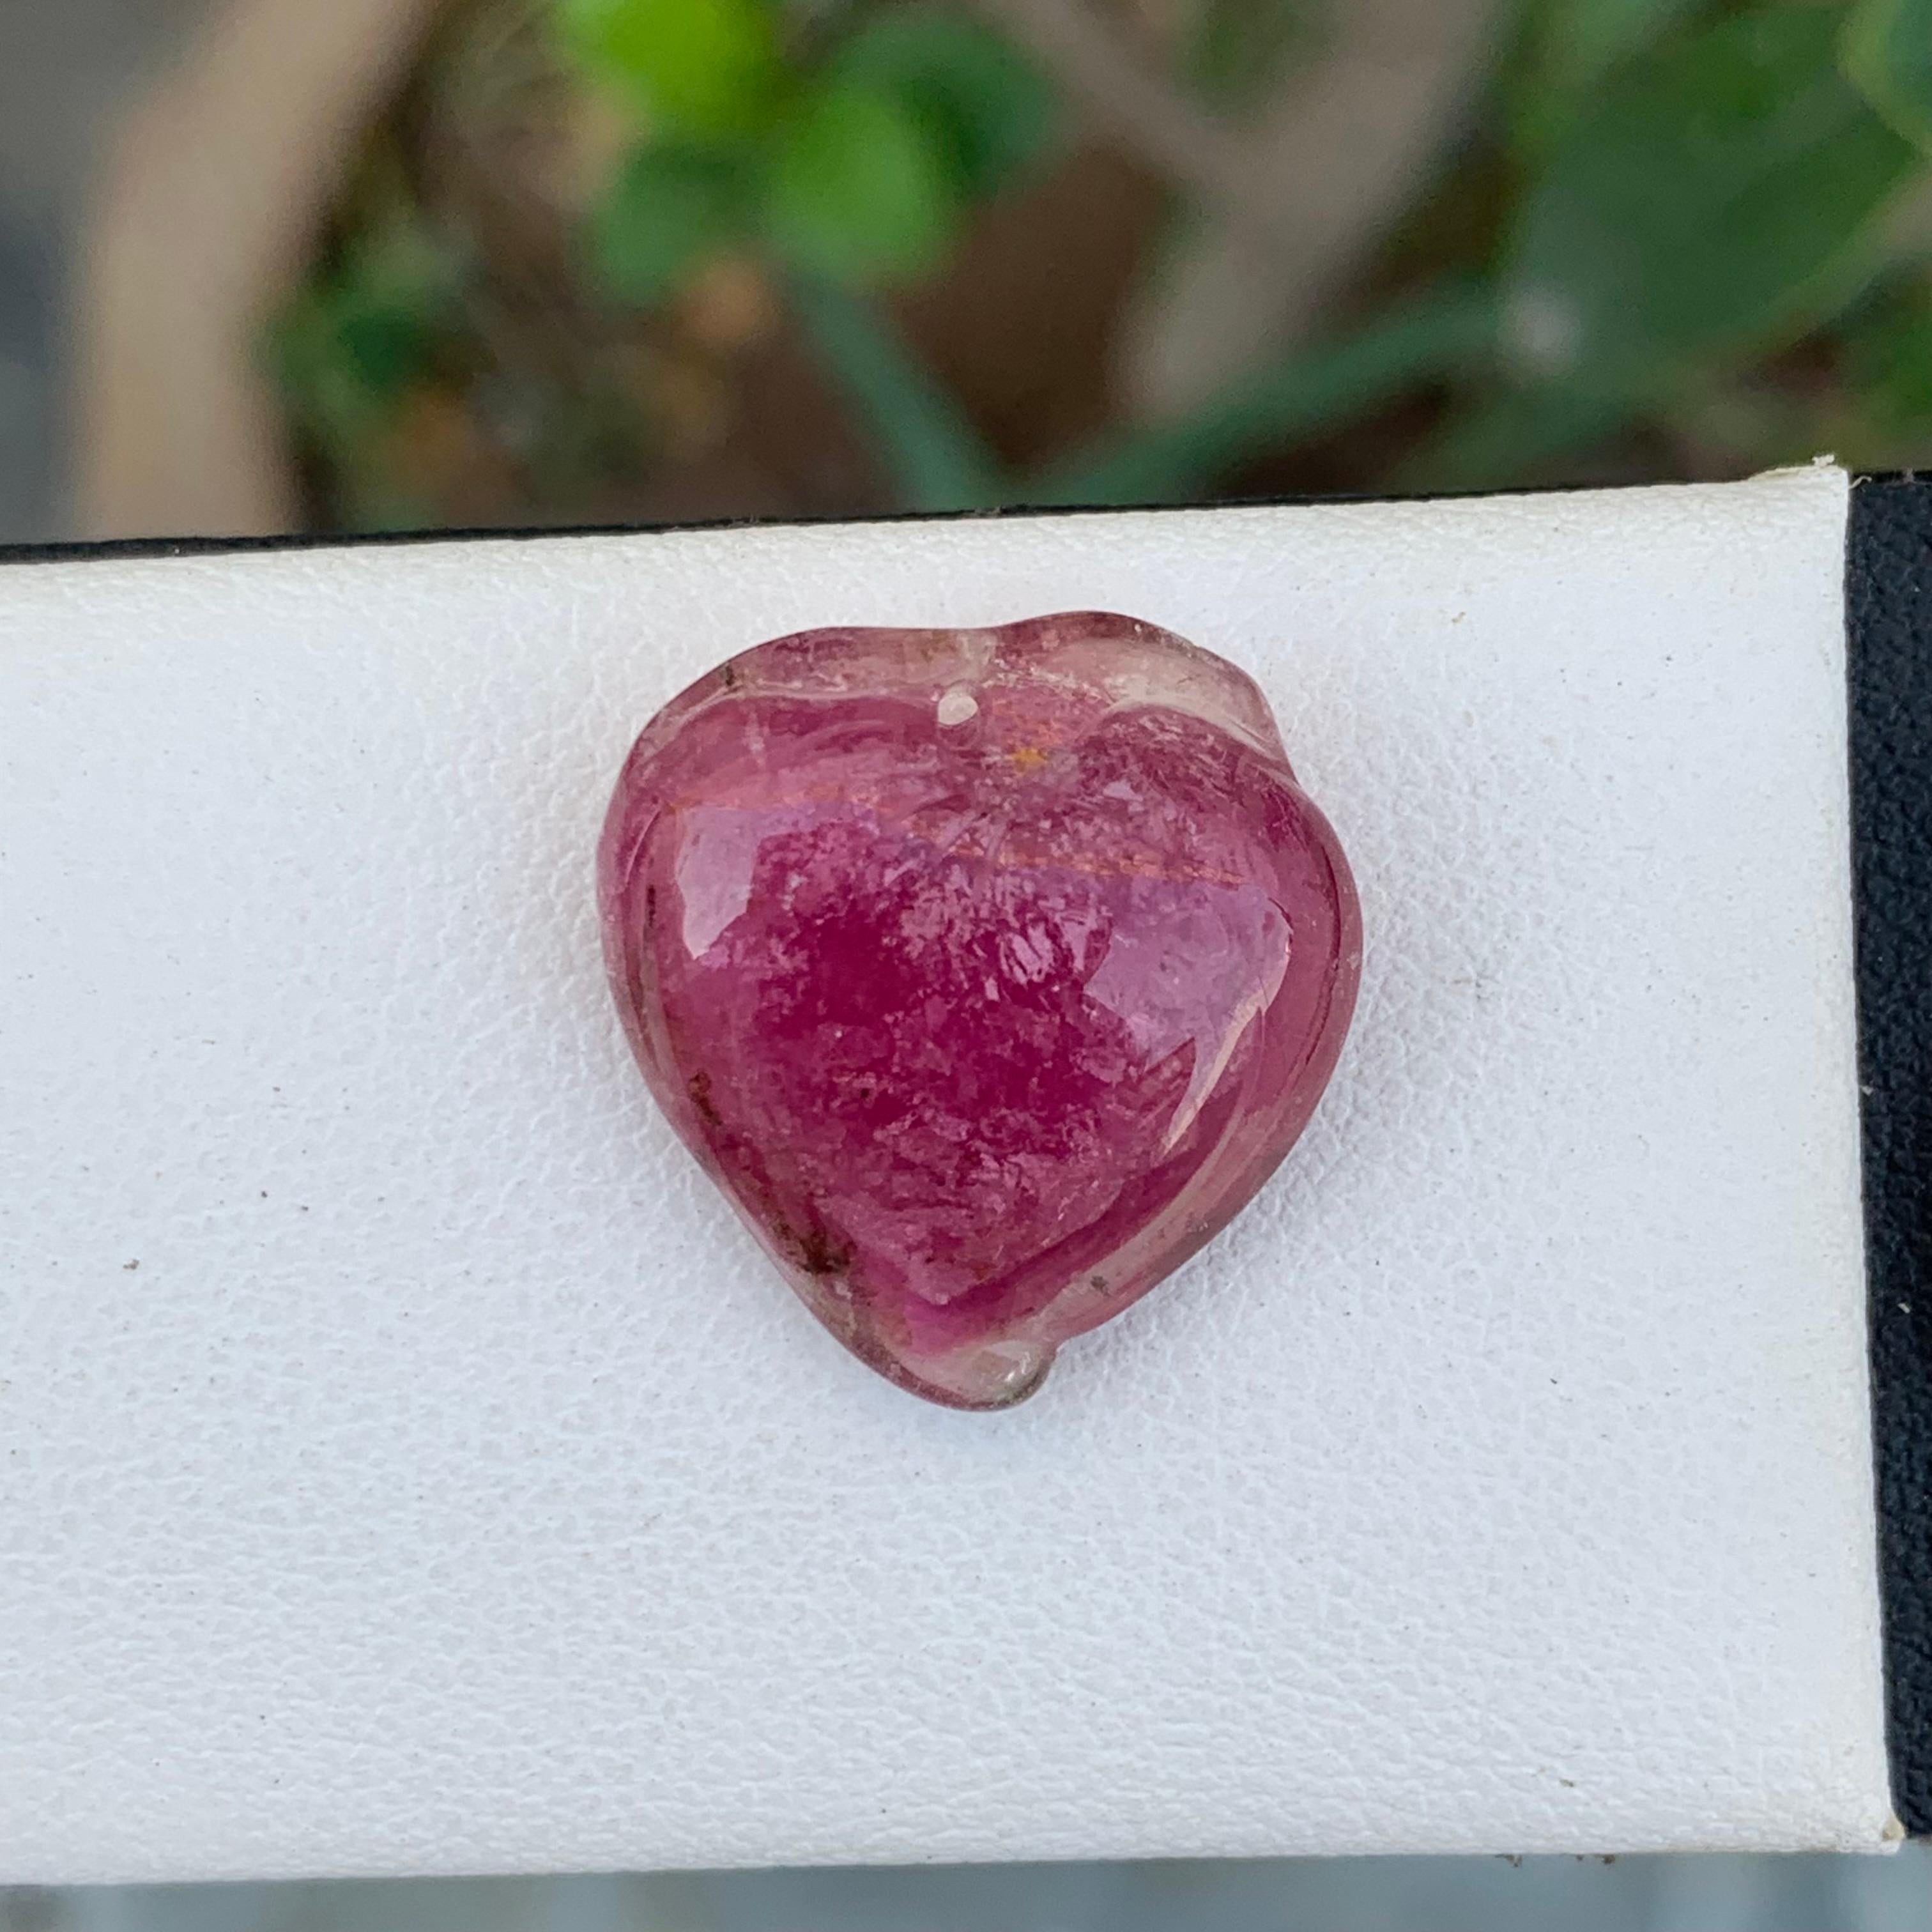 Malagasy 14.65 Carat Loose Heart Shape Tourmaline Drilled Carving from Africa For Sale